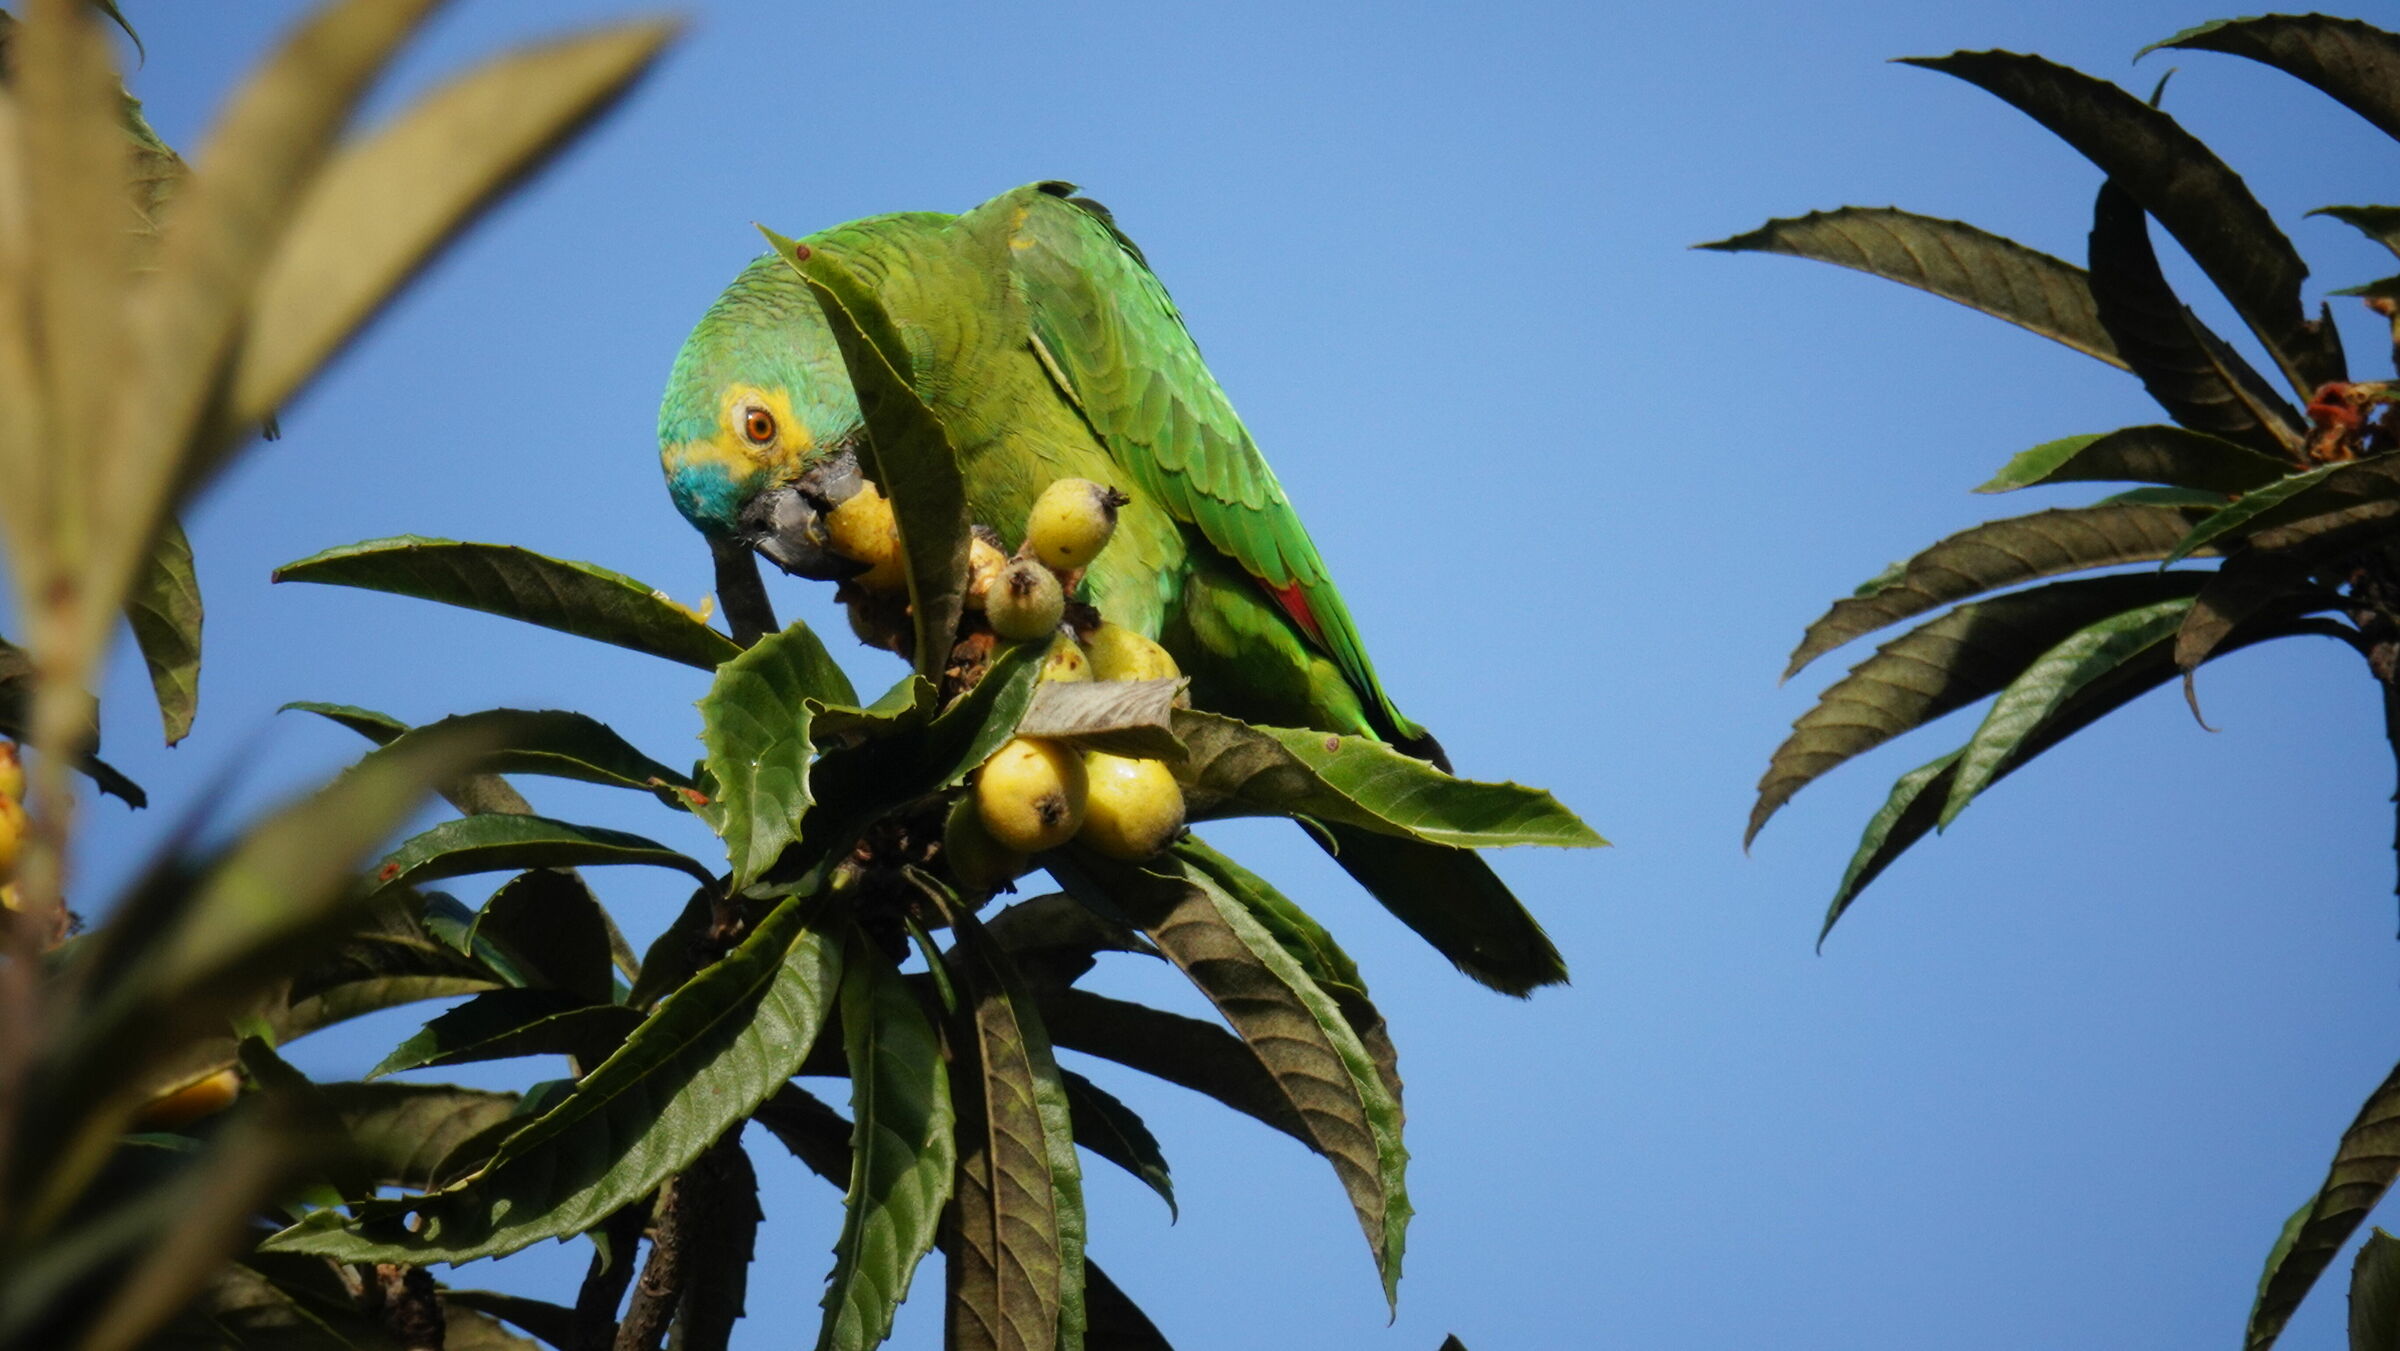 Green and yellow parrots...